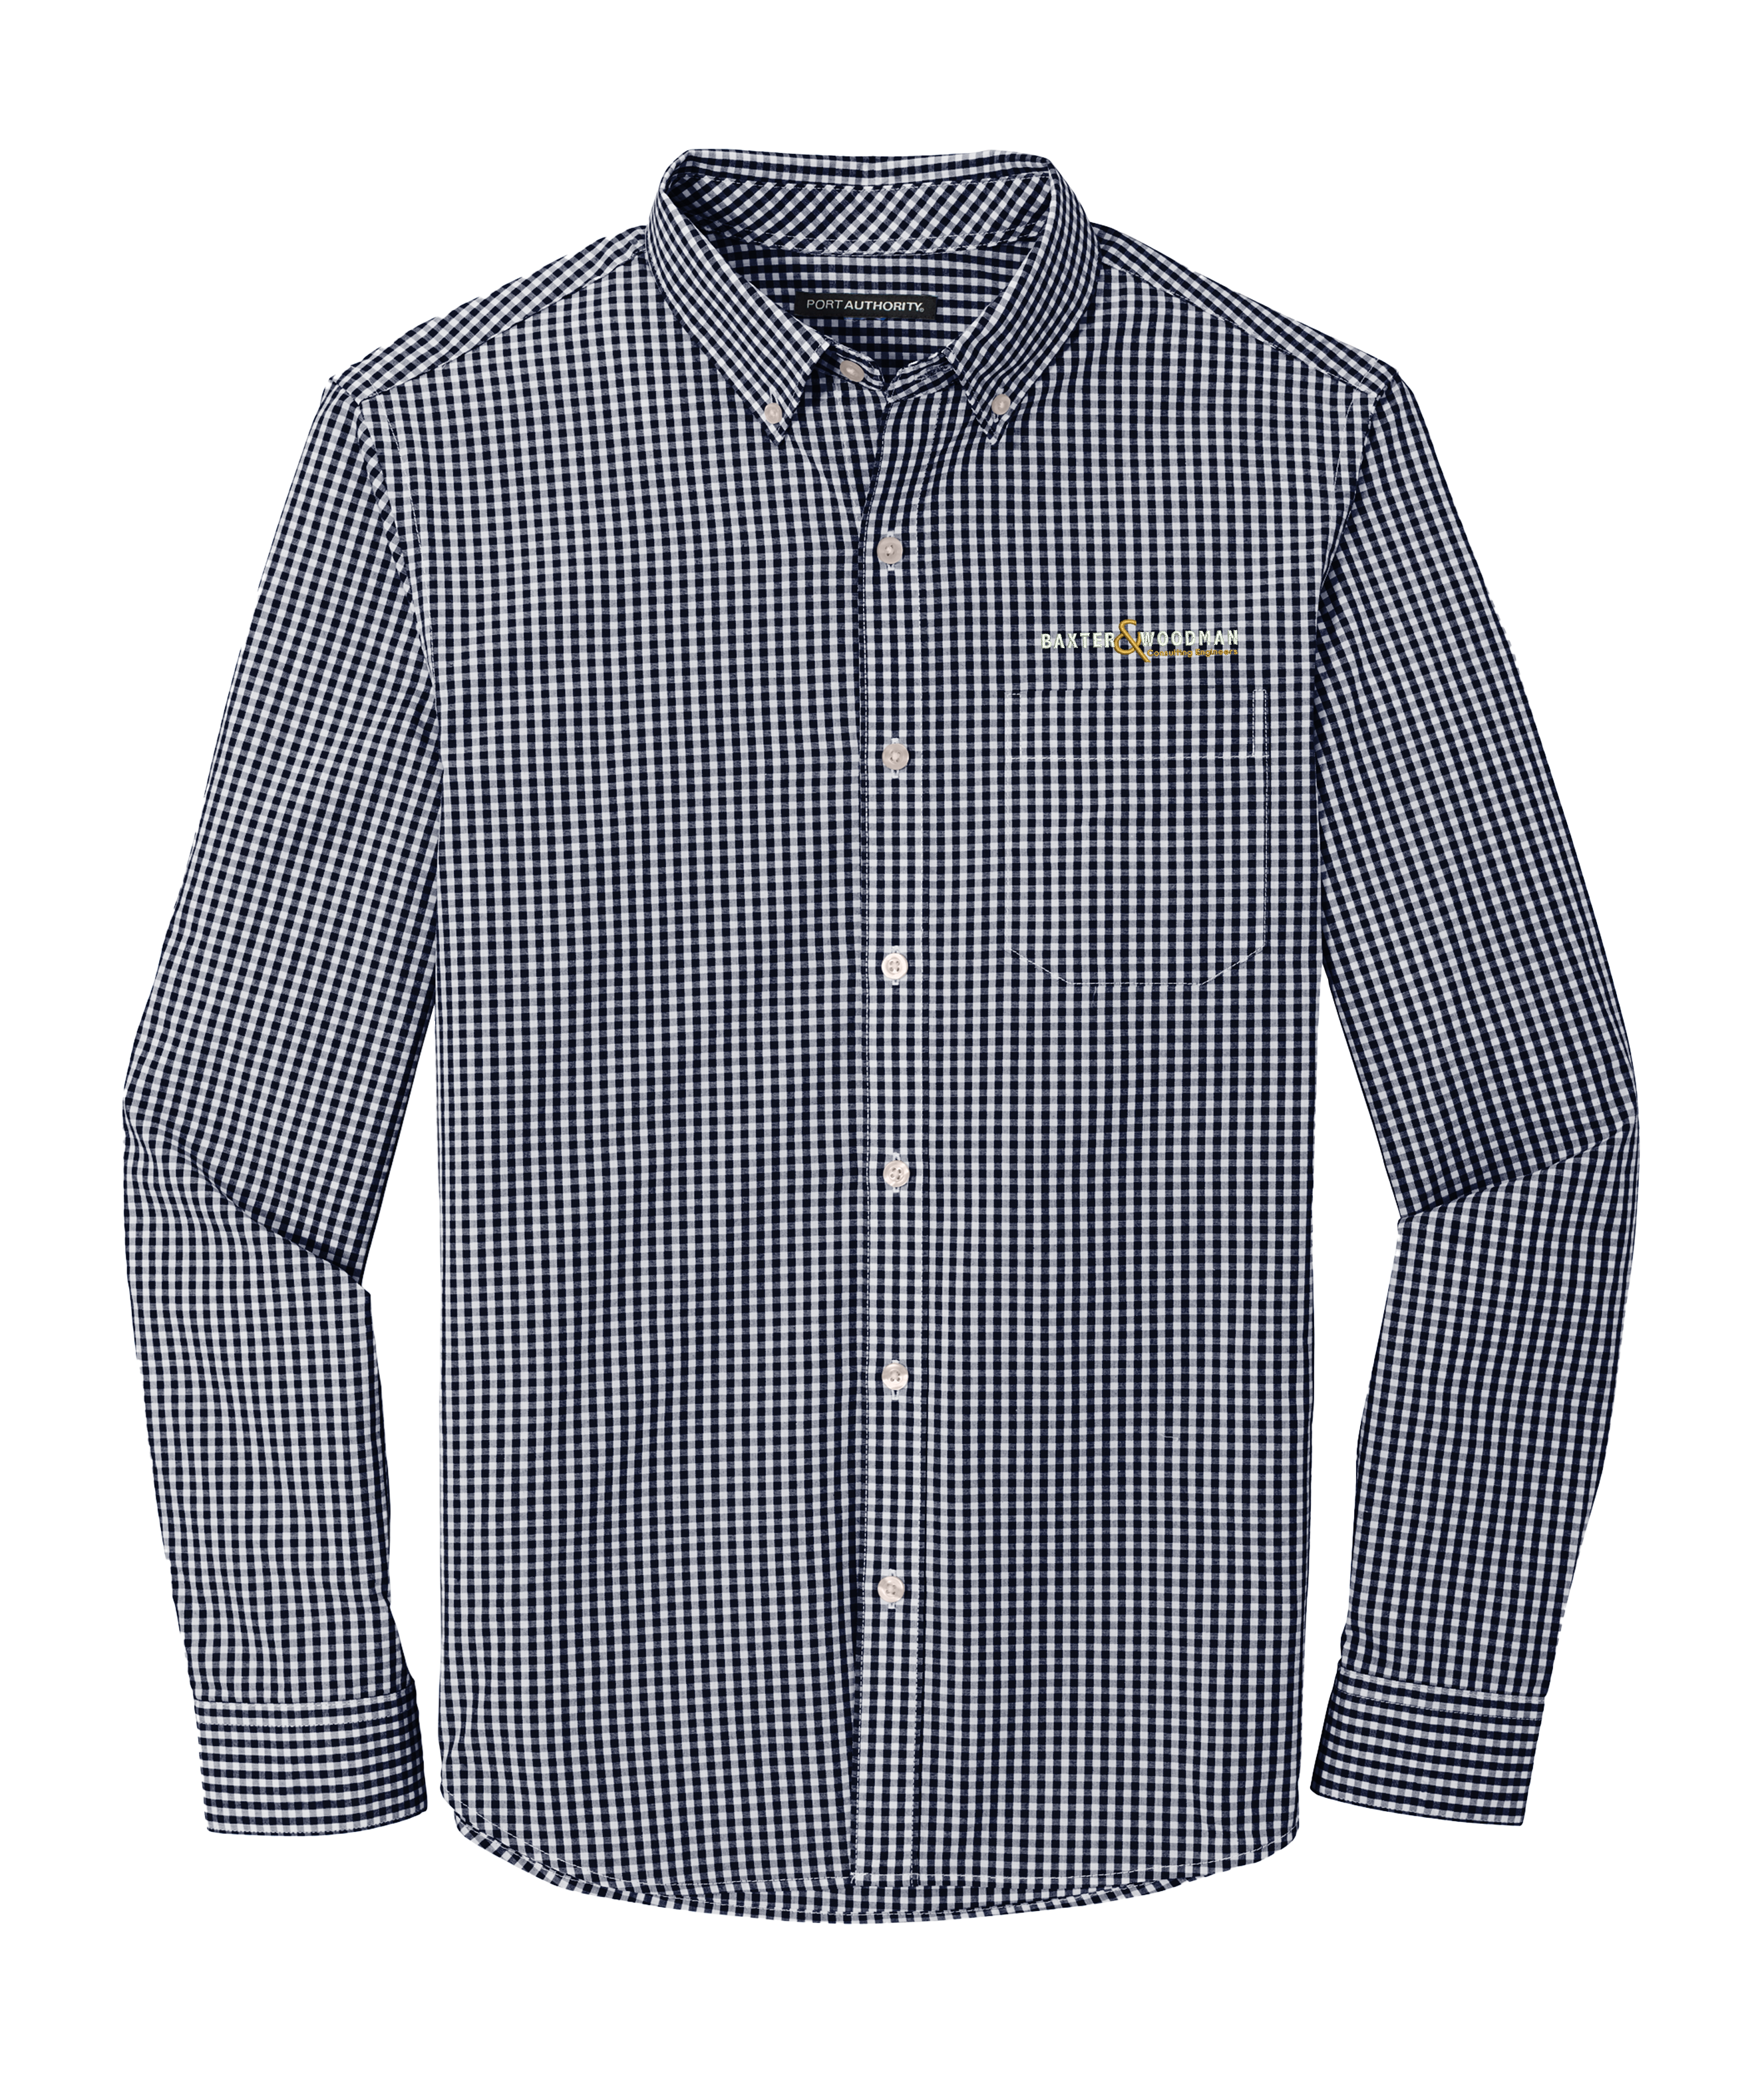 Port Authority ® Broadcloth Gingham Easy Care Shirt